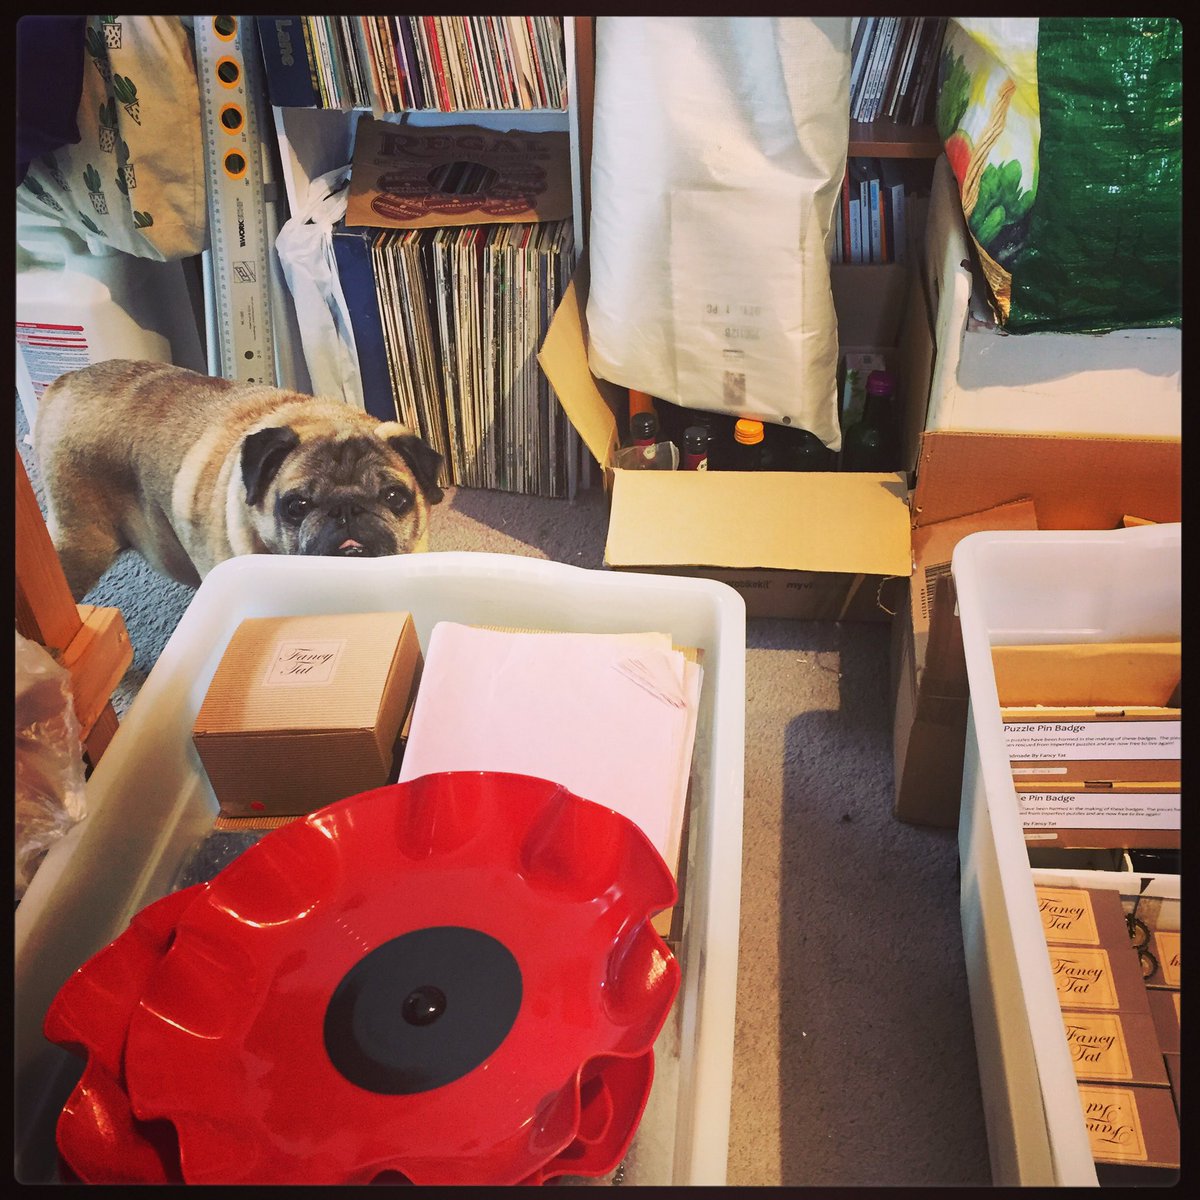 Packing boxes for the @hevercastle #handmadeandhomegrown event this weekend. Arty is not helping...#etsypets #hevercastle #upcycle #fancytat